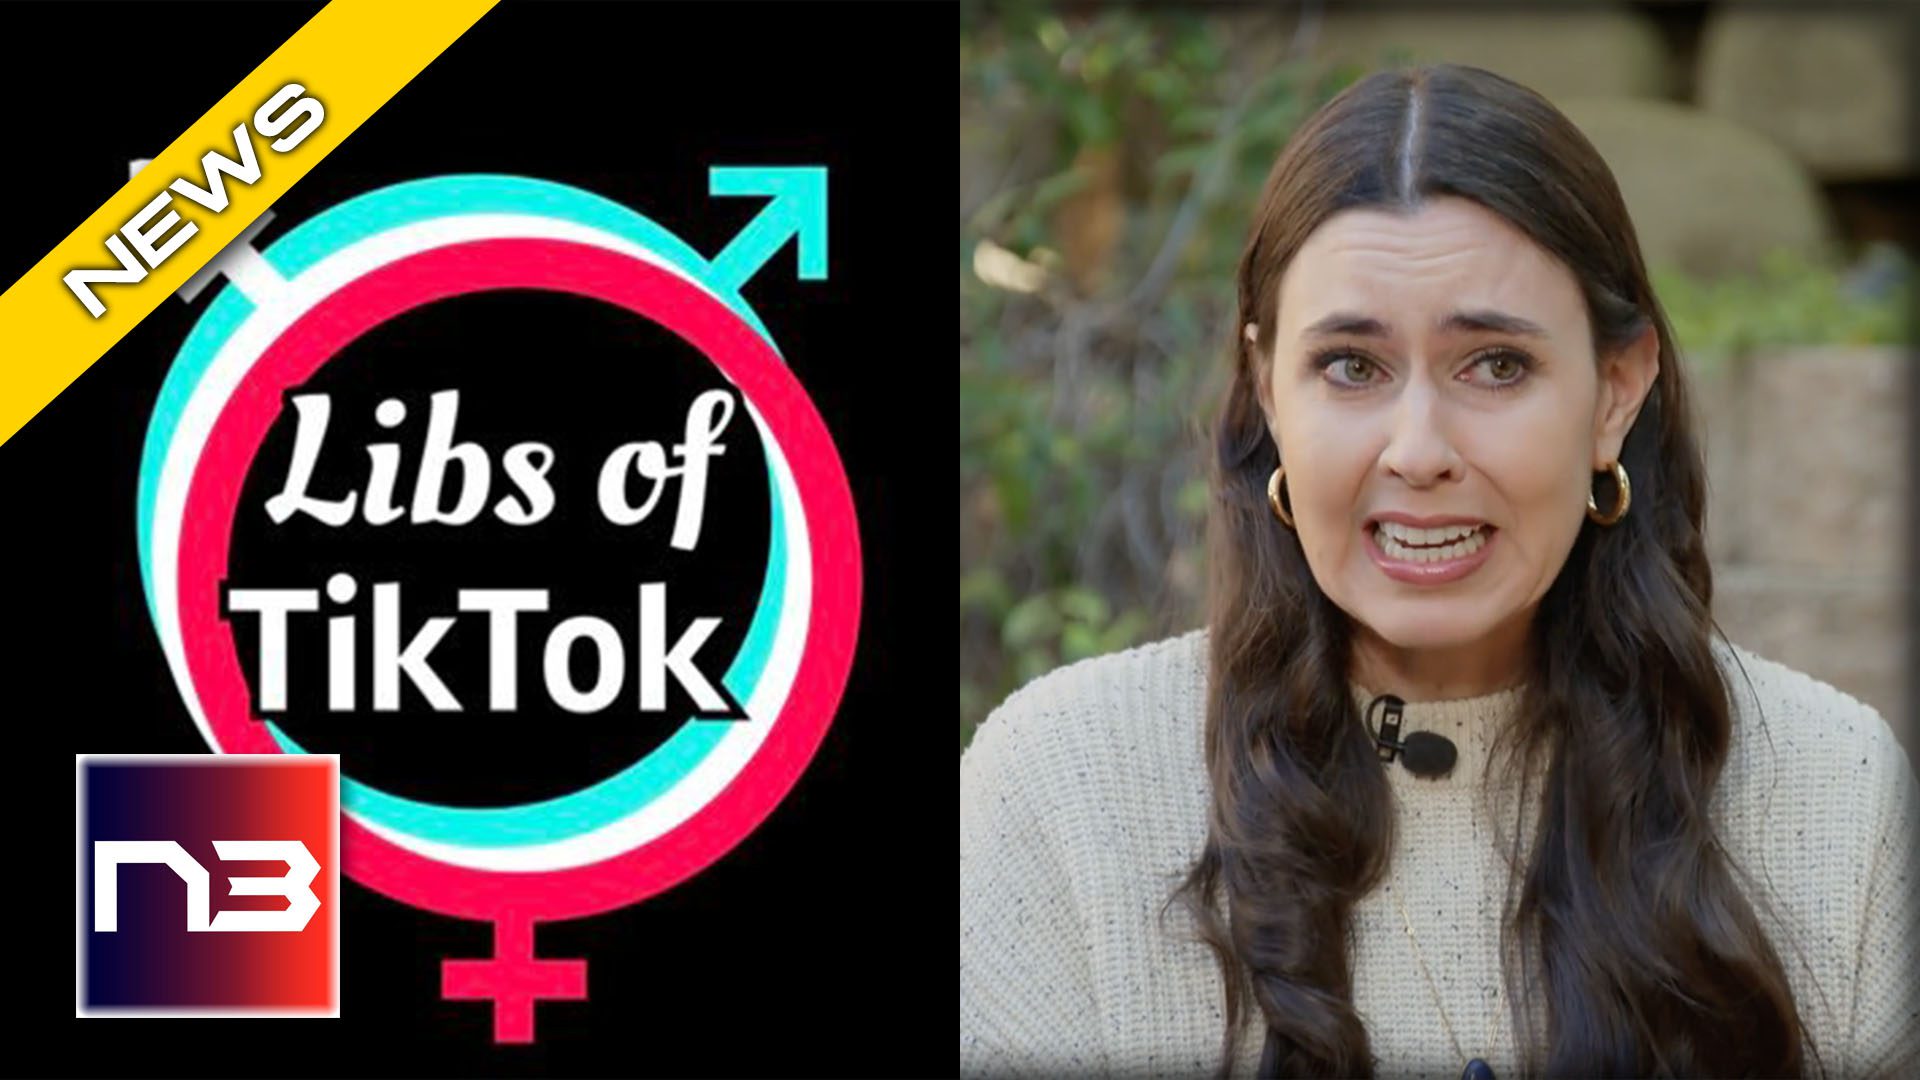 WATCH: WaPo Journalist Gets EXPOSED by Libs of TikTok for Doxxing Enemies